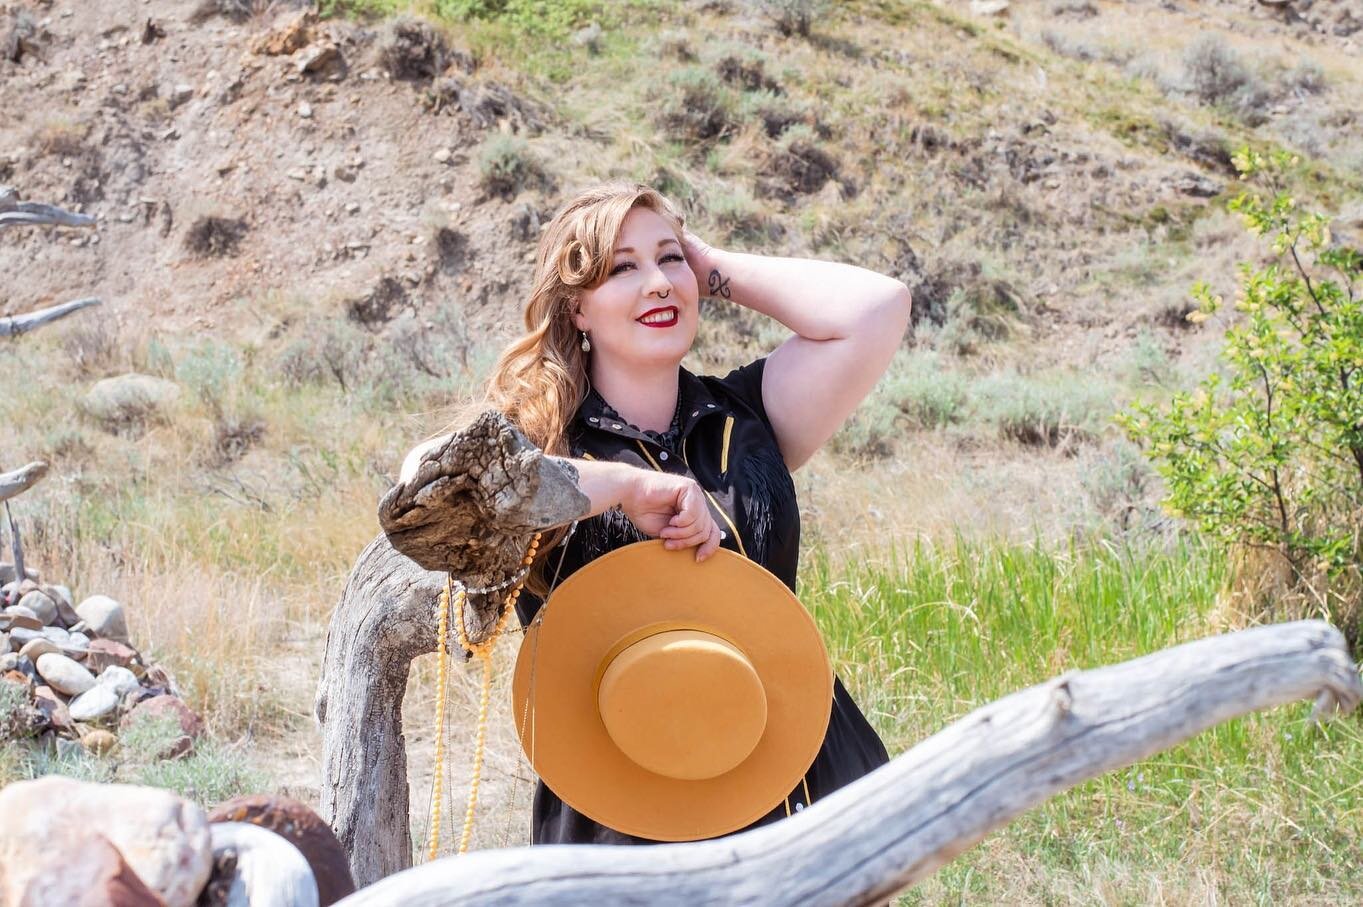 Sweetheart of the rodeo for @missmaggylu&rsquo;s #westernpinupchallenge 😘

Thanks to the incredible @missfriendphotography for these fantastic shots 😘